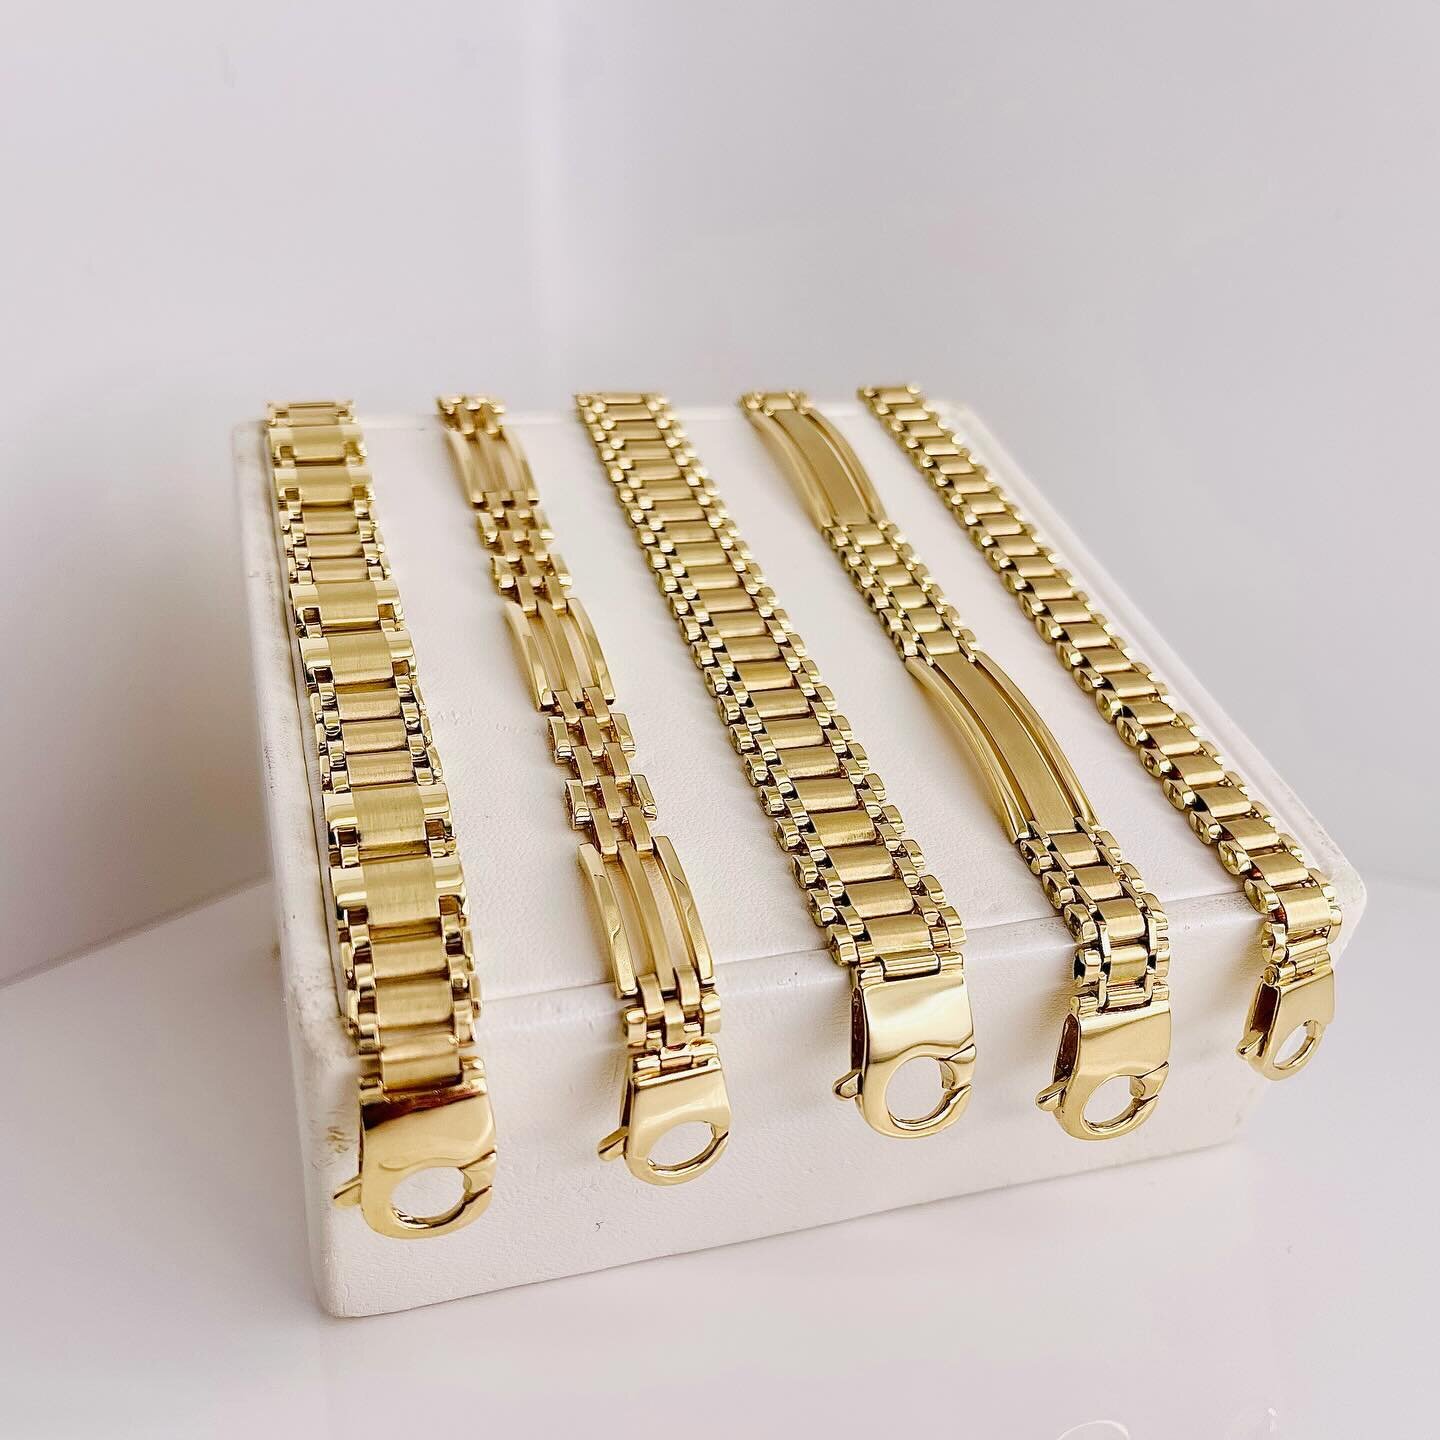 Italian 14 karat yellow gold bracelet

Need more information?
Please message us. 

#finejewel #gold #earring #ring #necklace #everyday
#18k #18kgold #yellowgold #18kwhitegold #whitegold #jewellery #jewelry #canadianmade #italianmade #craftsman
#love 